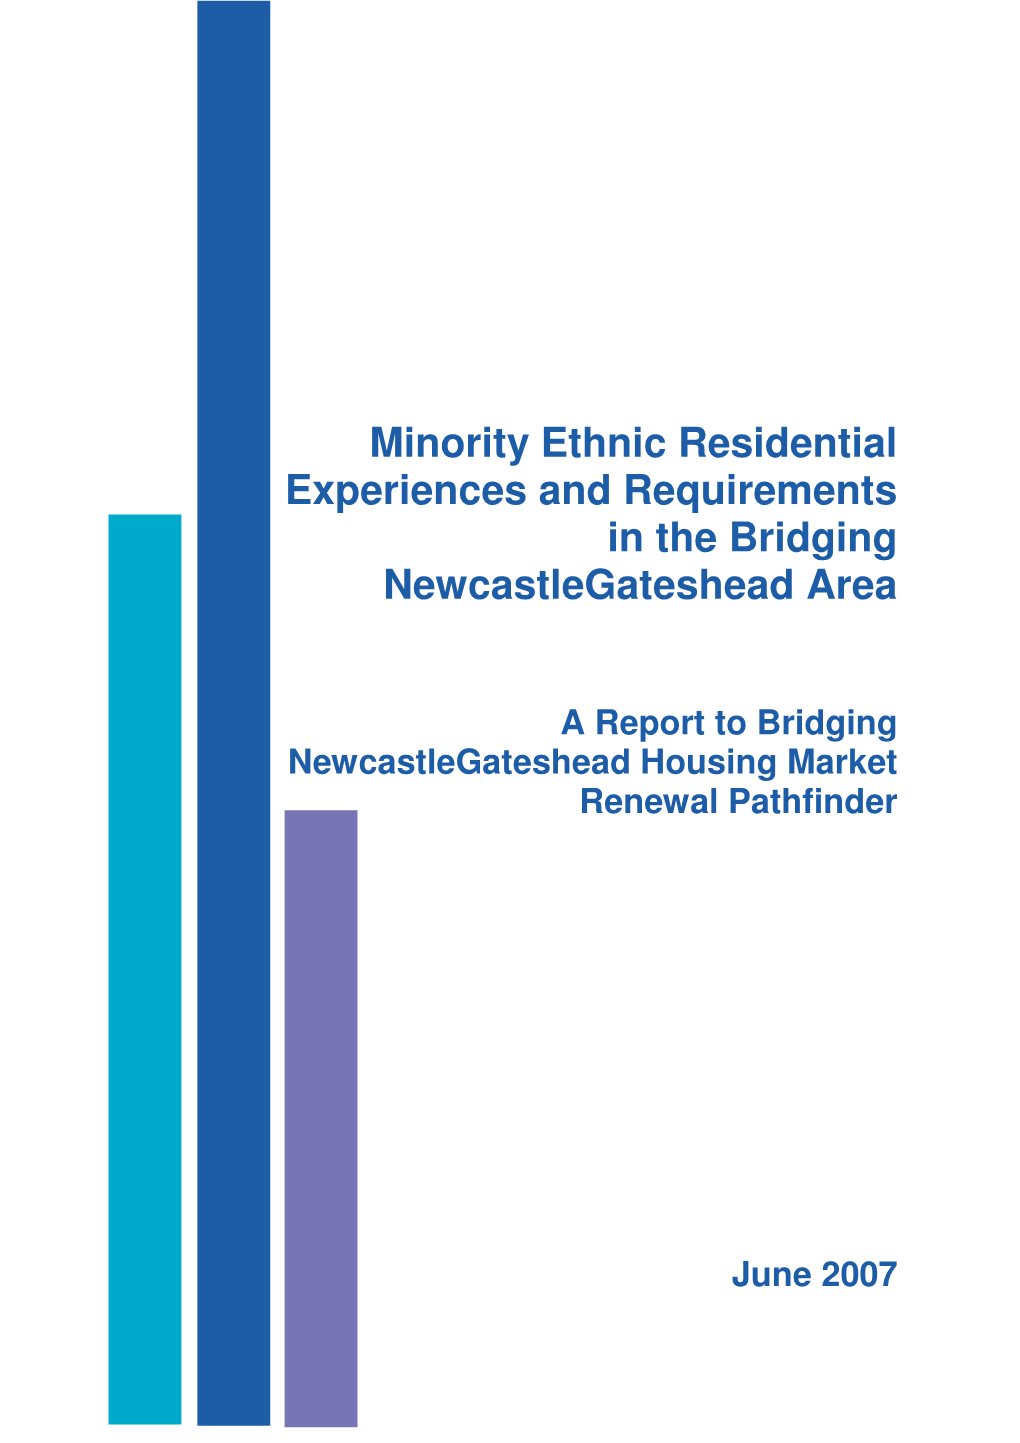 Minority Ethnic Residential Experiences and Requirements in the Bridging Newcastlegateshead Area